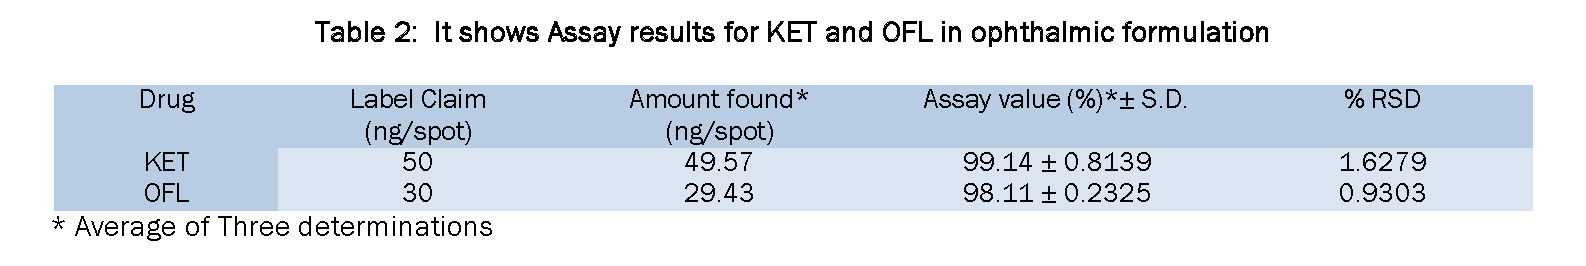 Pharmaceutical-Analysis-It-shows-Assay-results-for-KET-and-OFL-ophthalmic-formulation